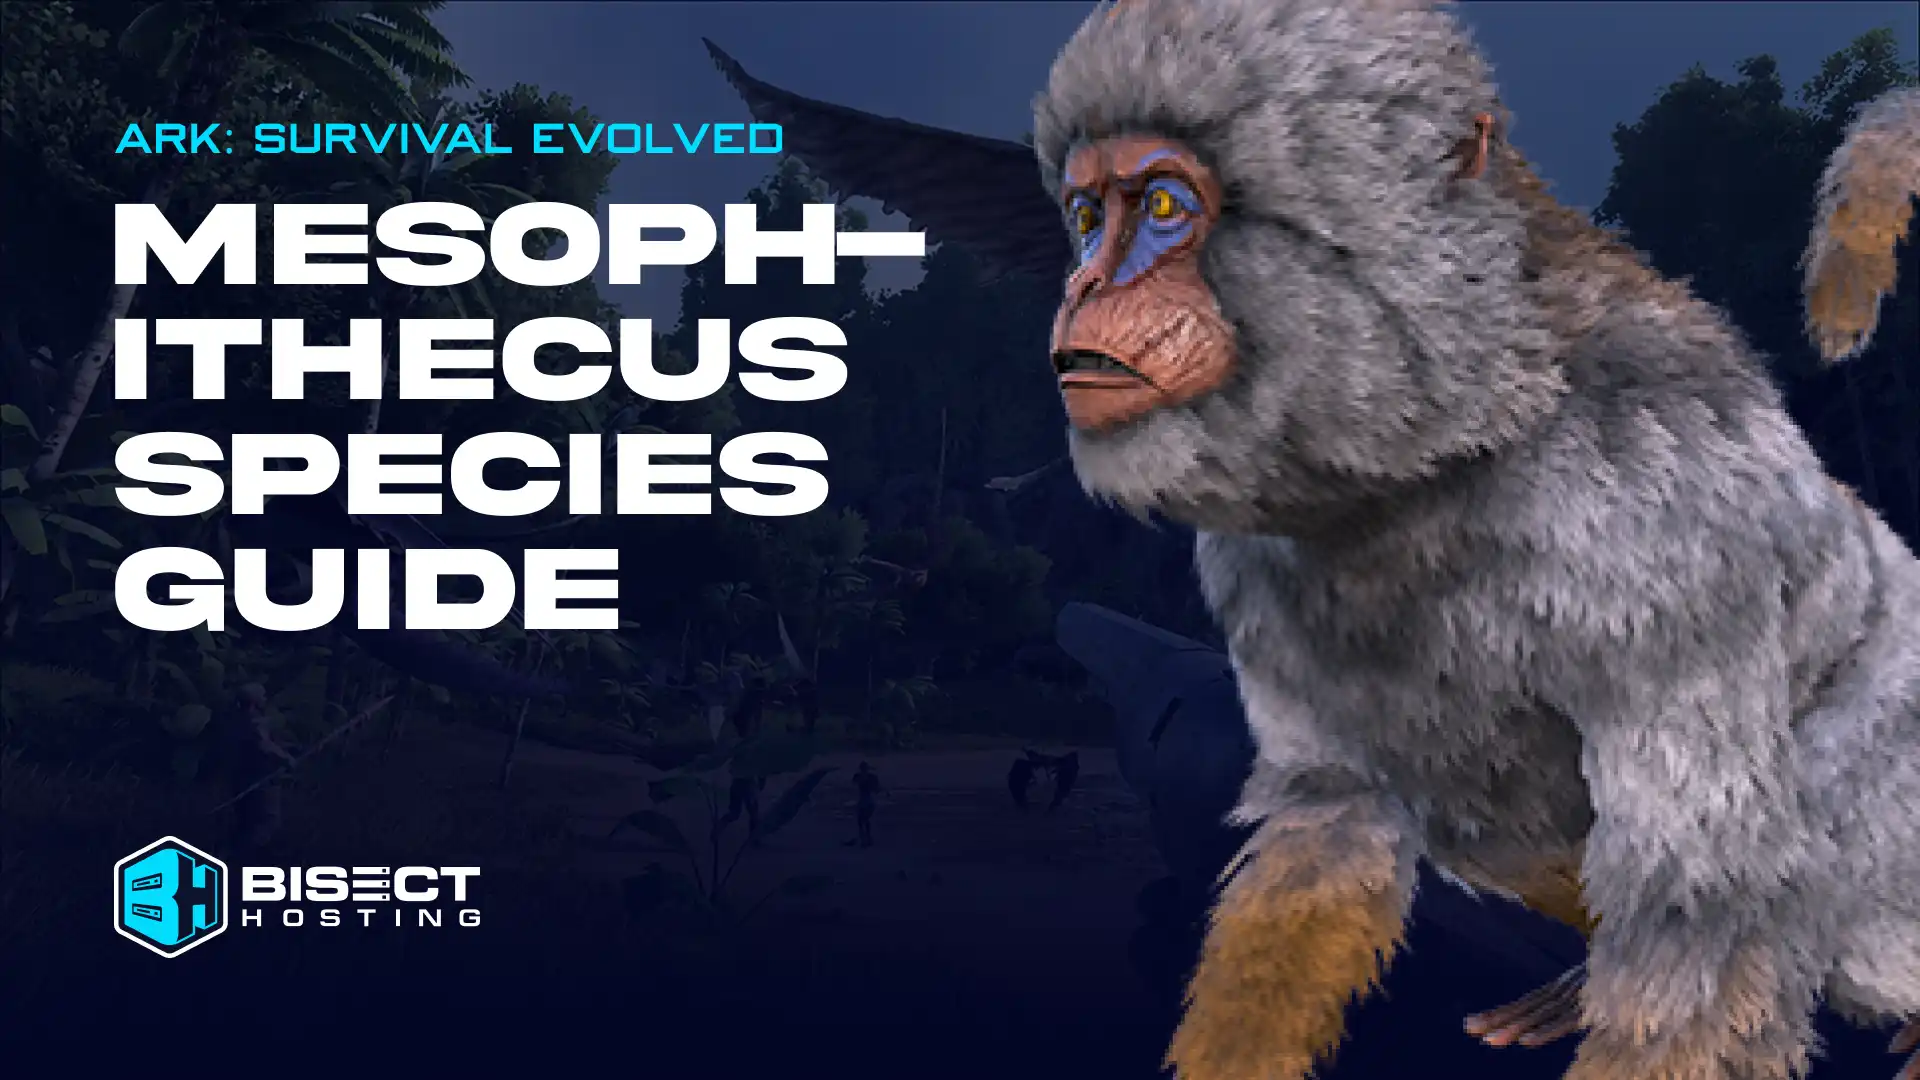 ARK: Survival Evolved Mesopithecus Species Guide: Stats, How to Tame, & More